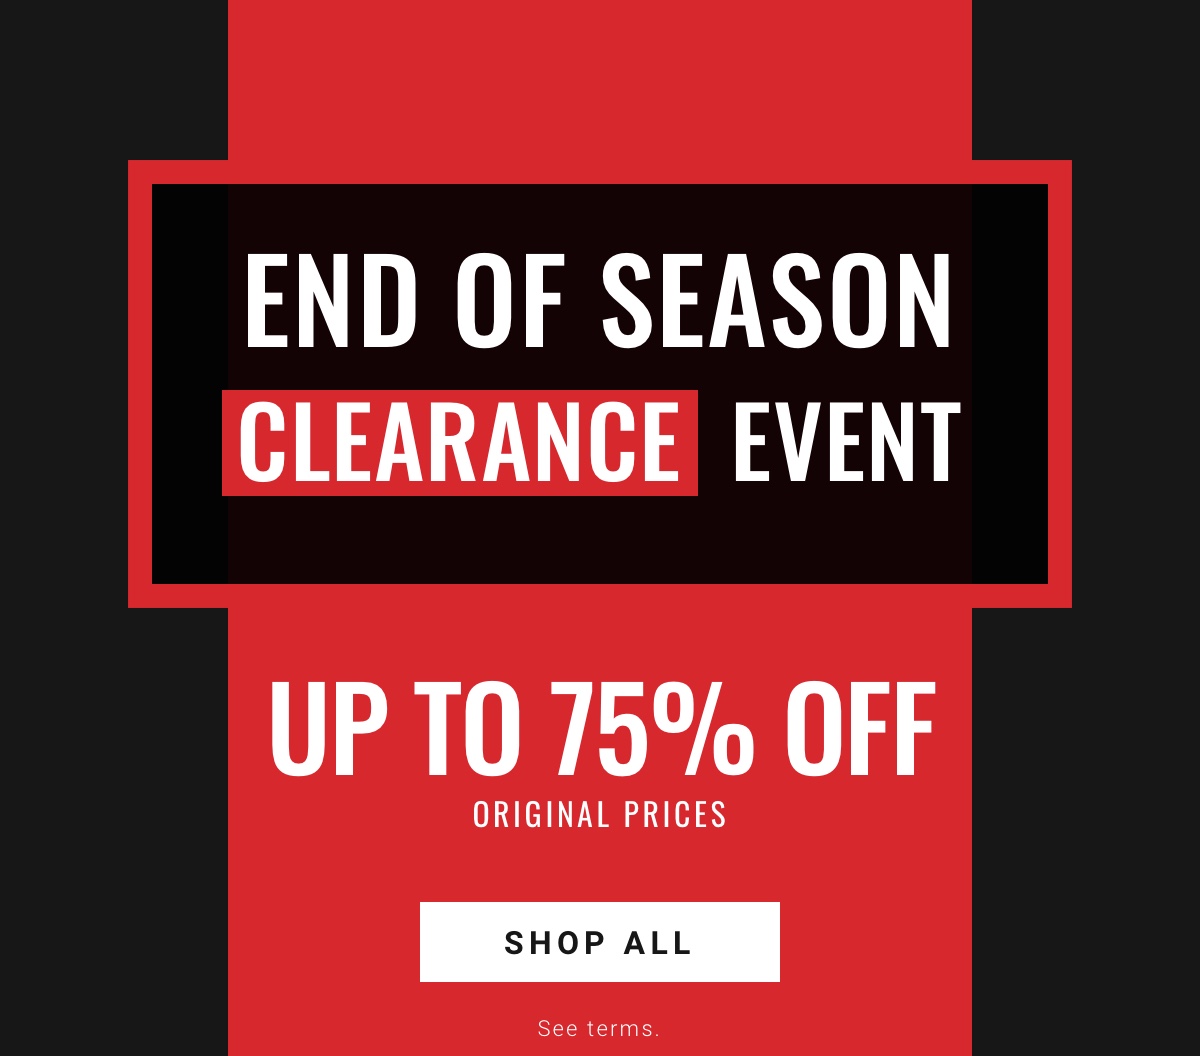 End of Season CLEARANCE Event|Up to 75% Off Original Prices